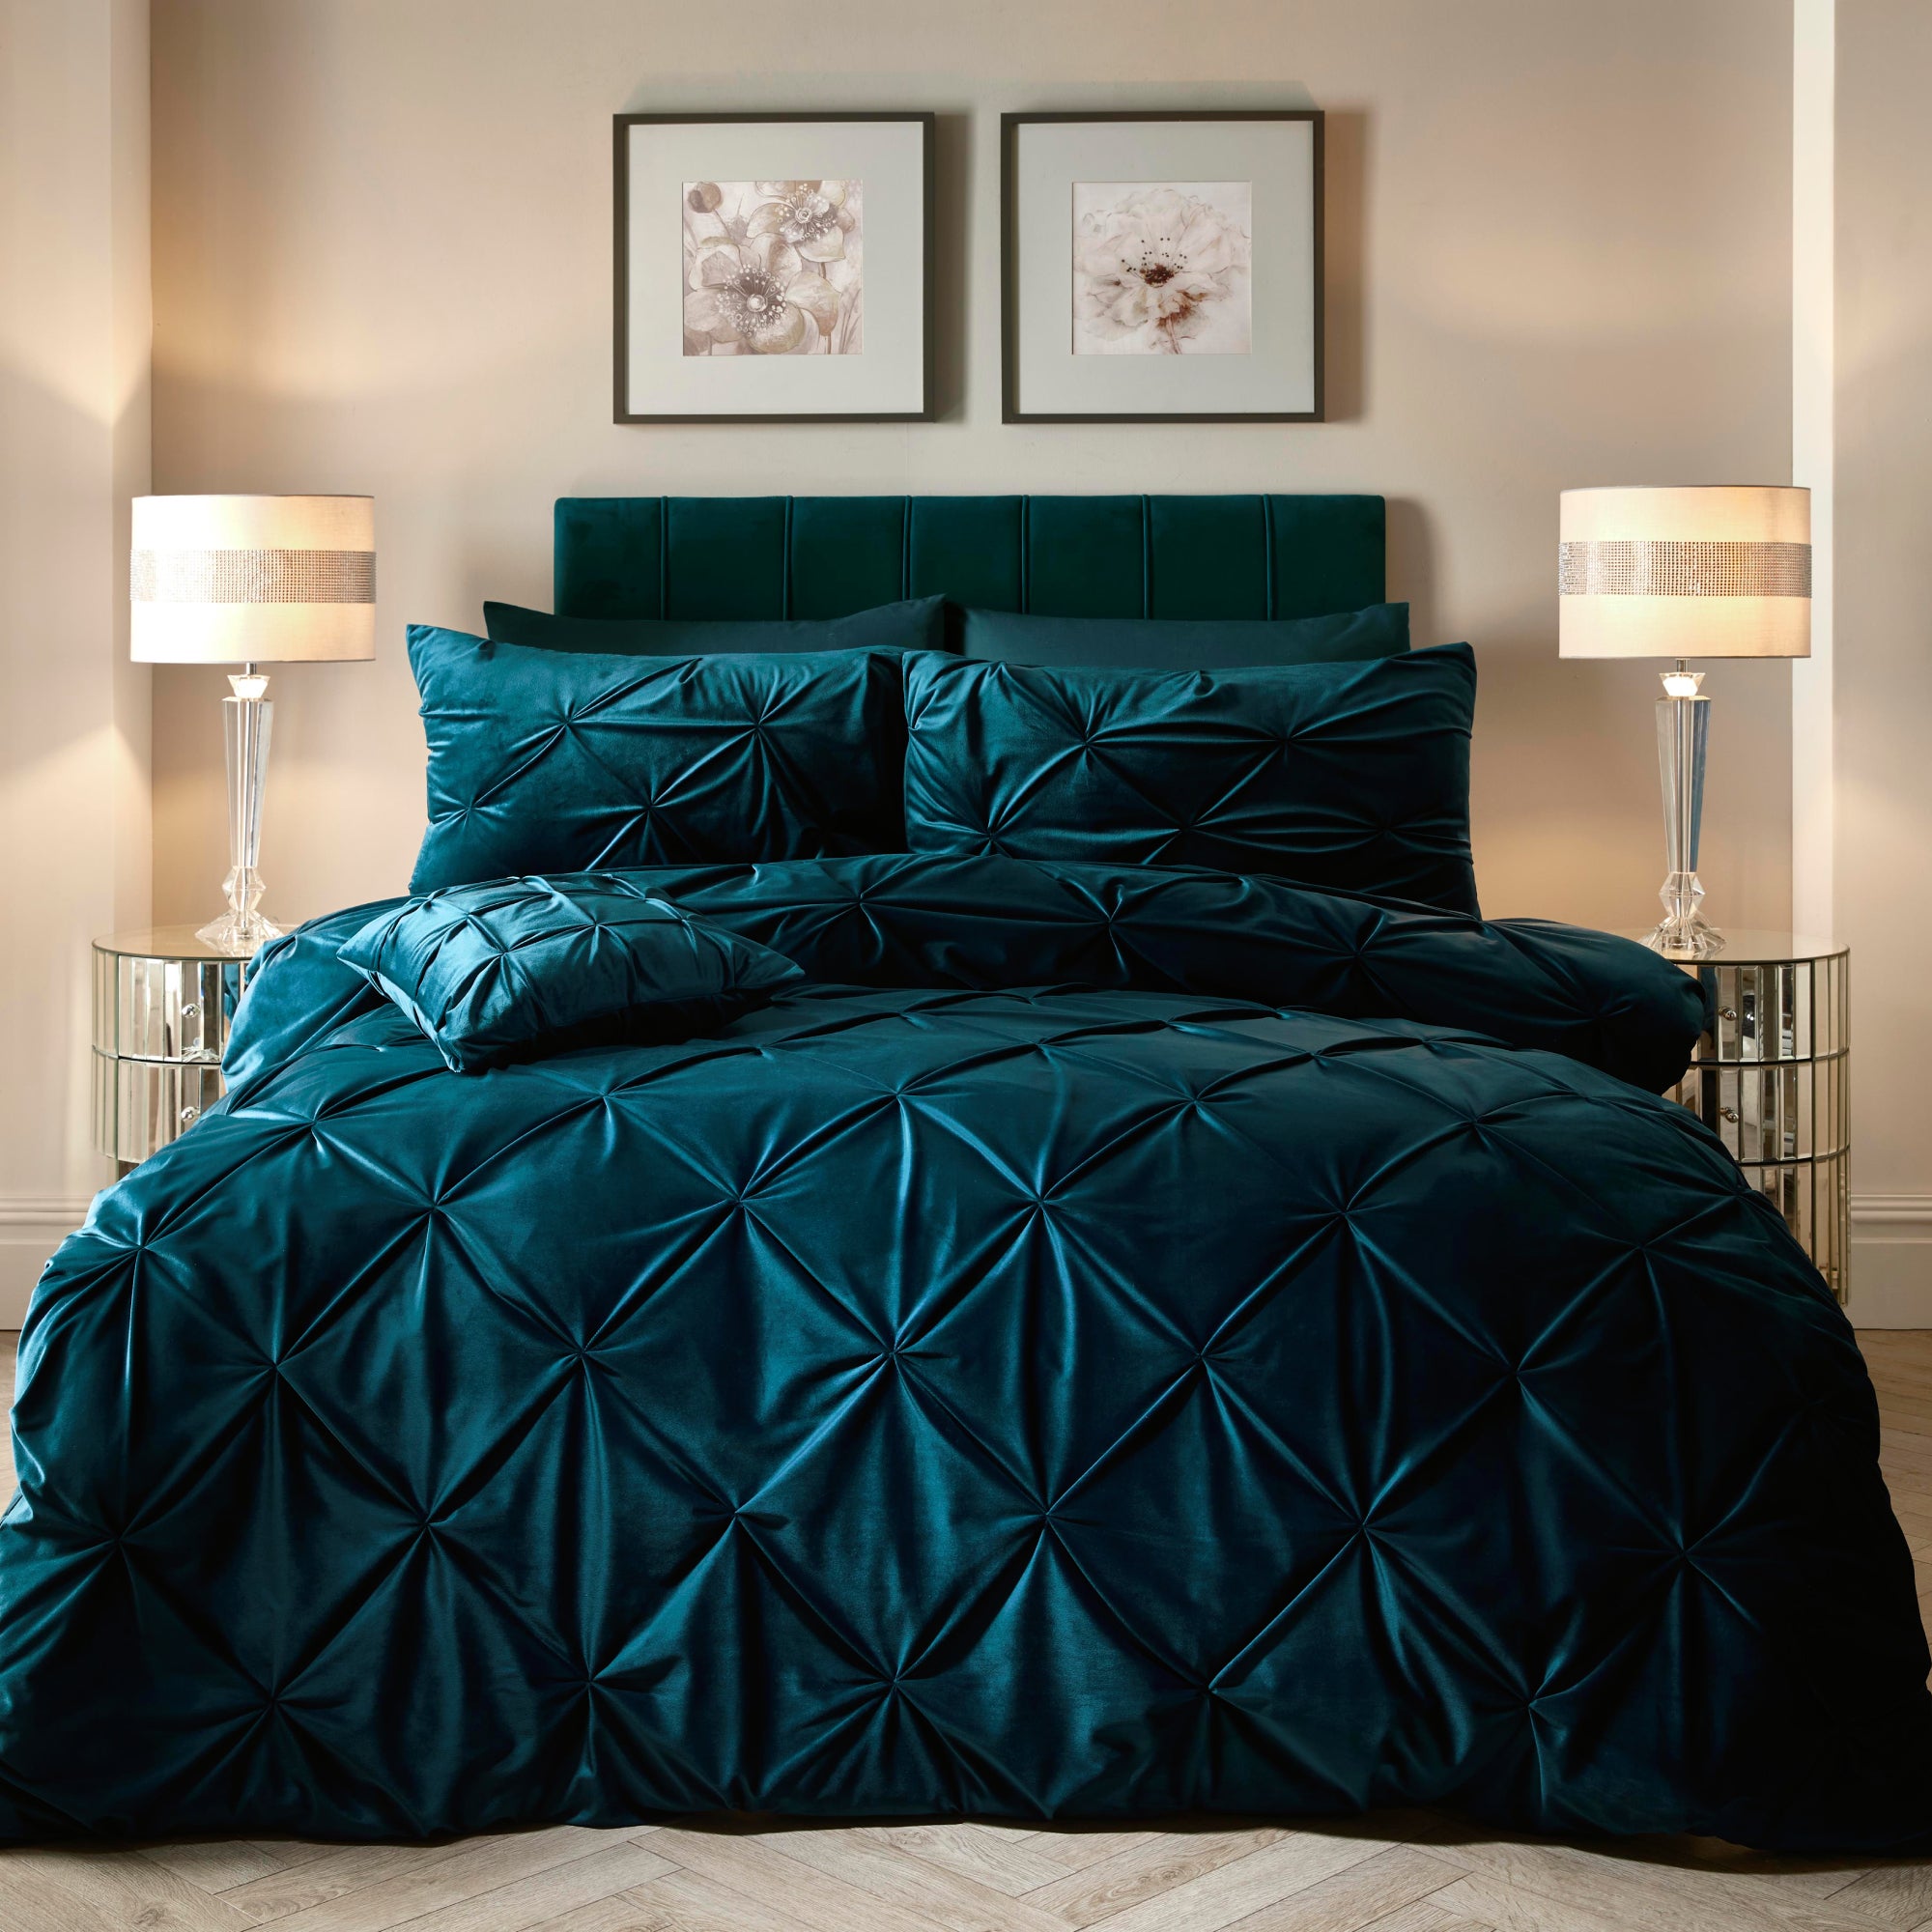 Soiree Mira Teal Duvet Cover And Pillowcase Set Teal Green